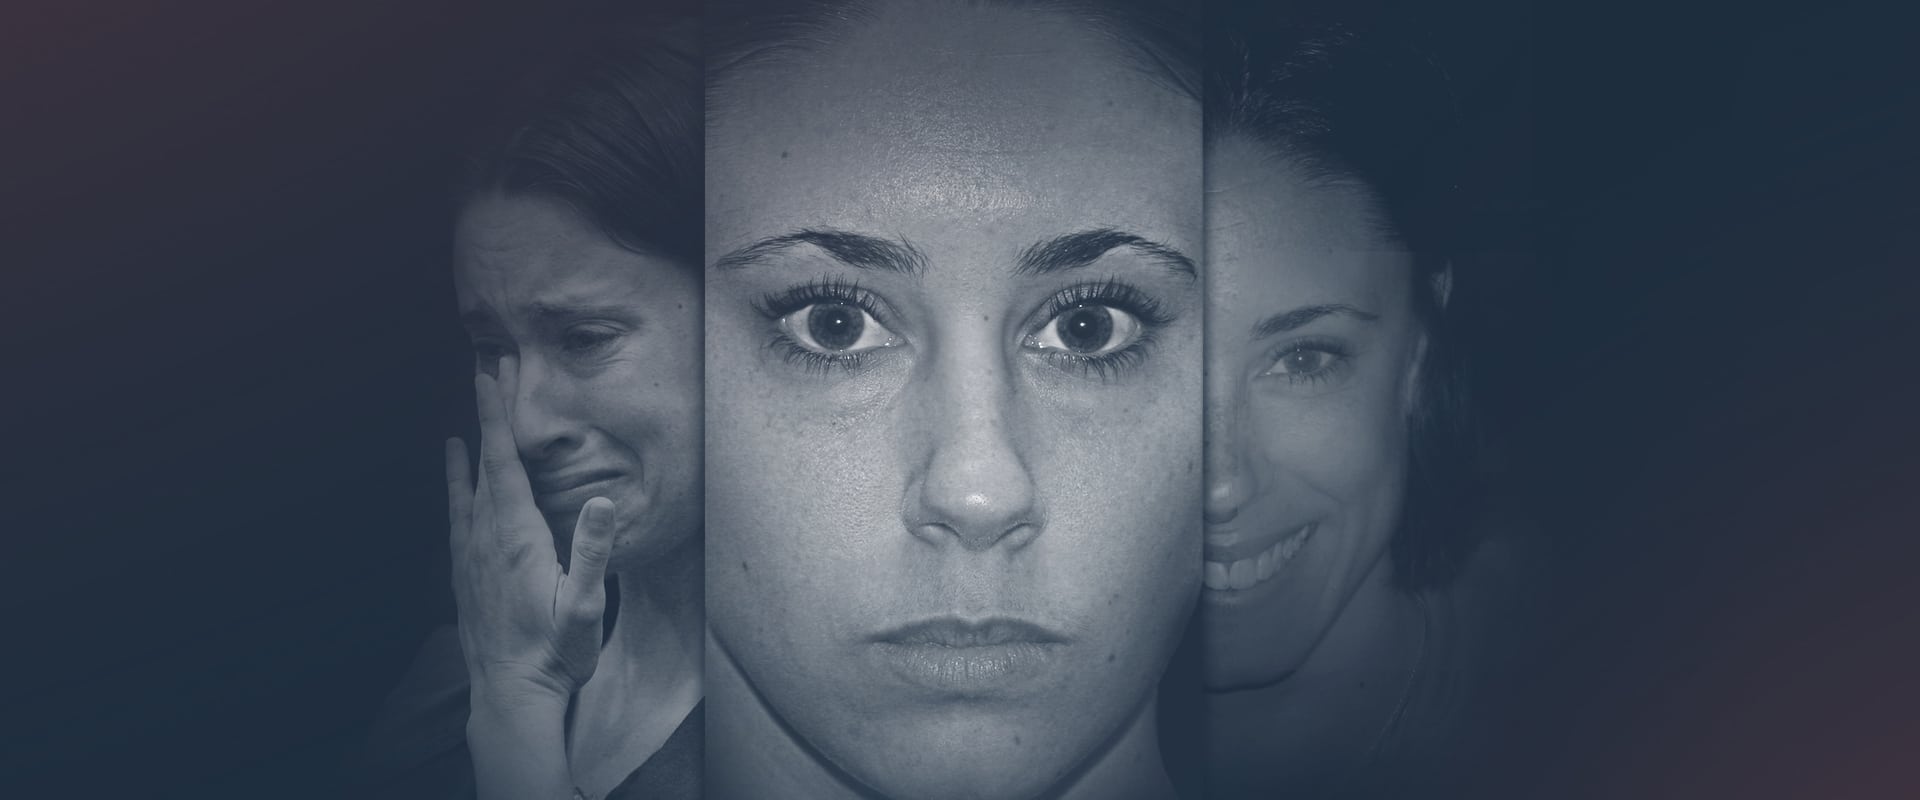 Casey Anthony: An American Murder Mystery